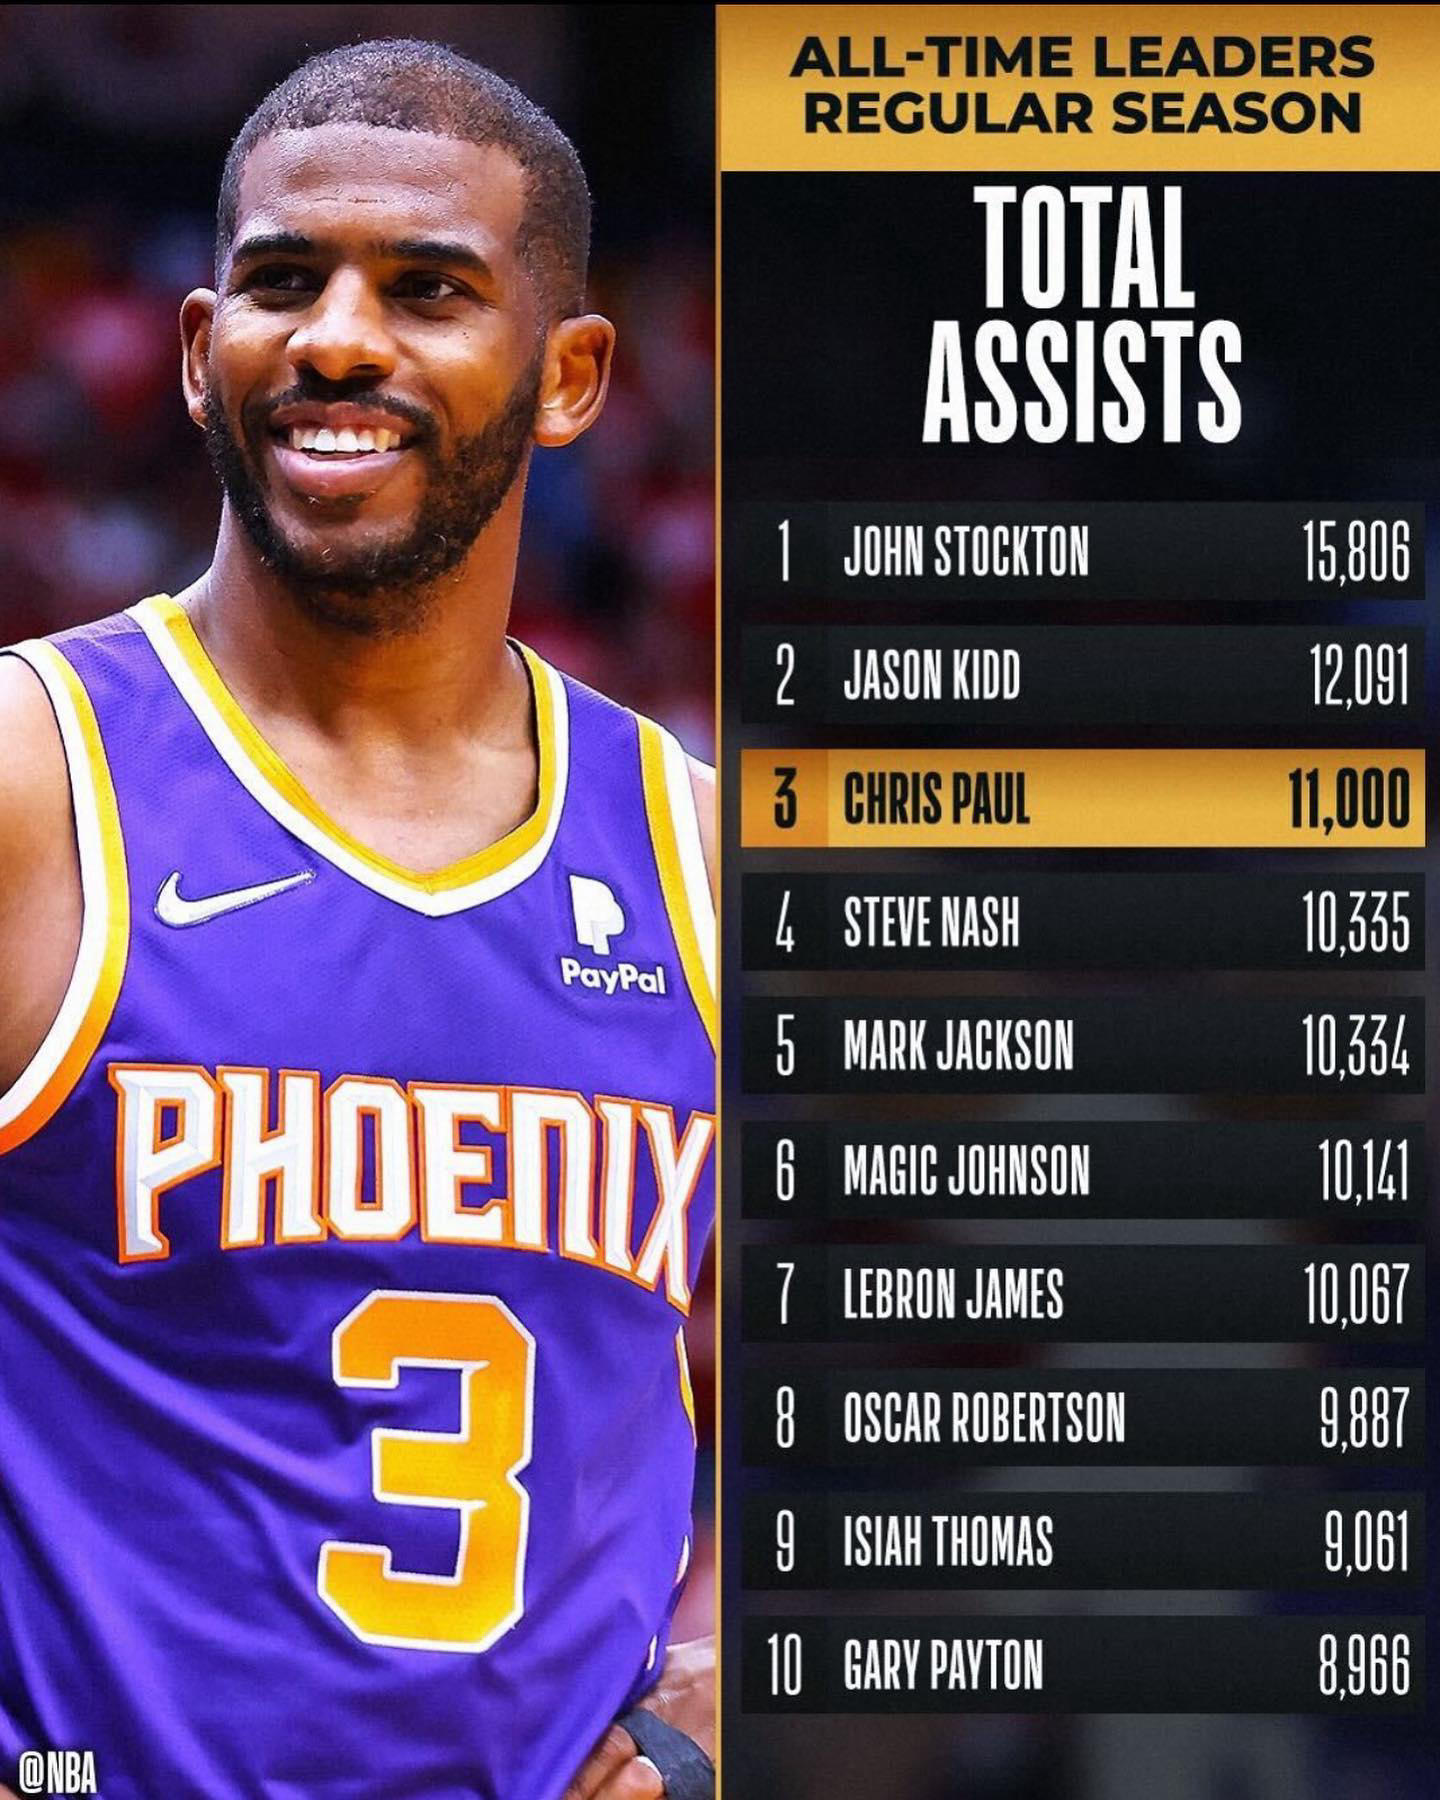 NBA - #CP3 becomes just the THIRD player in NBA history to surpass 11,000 career assists